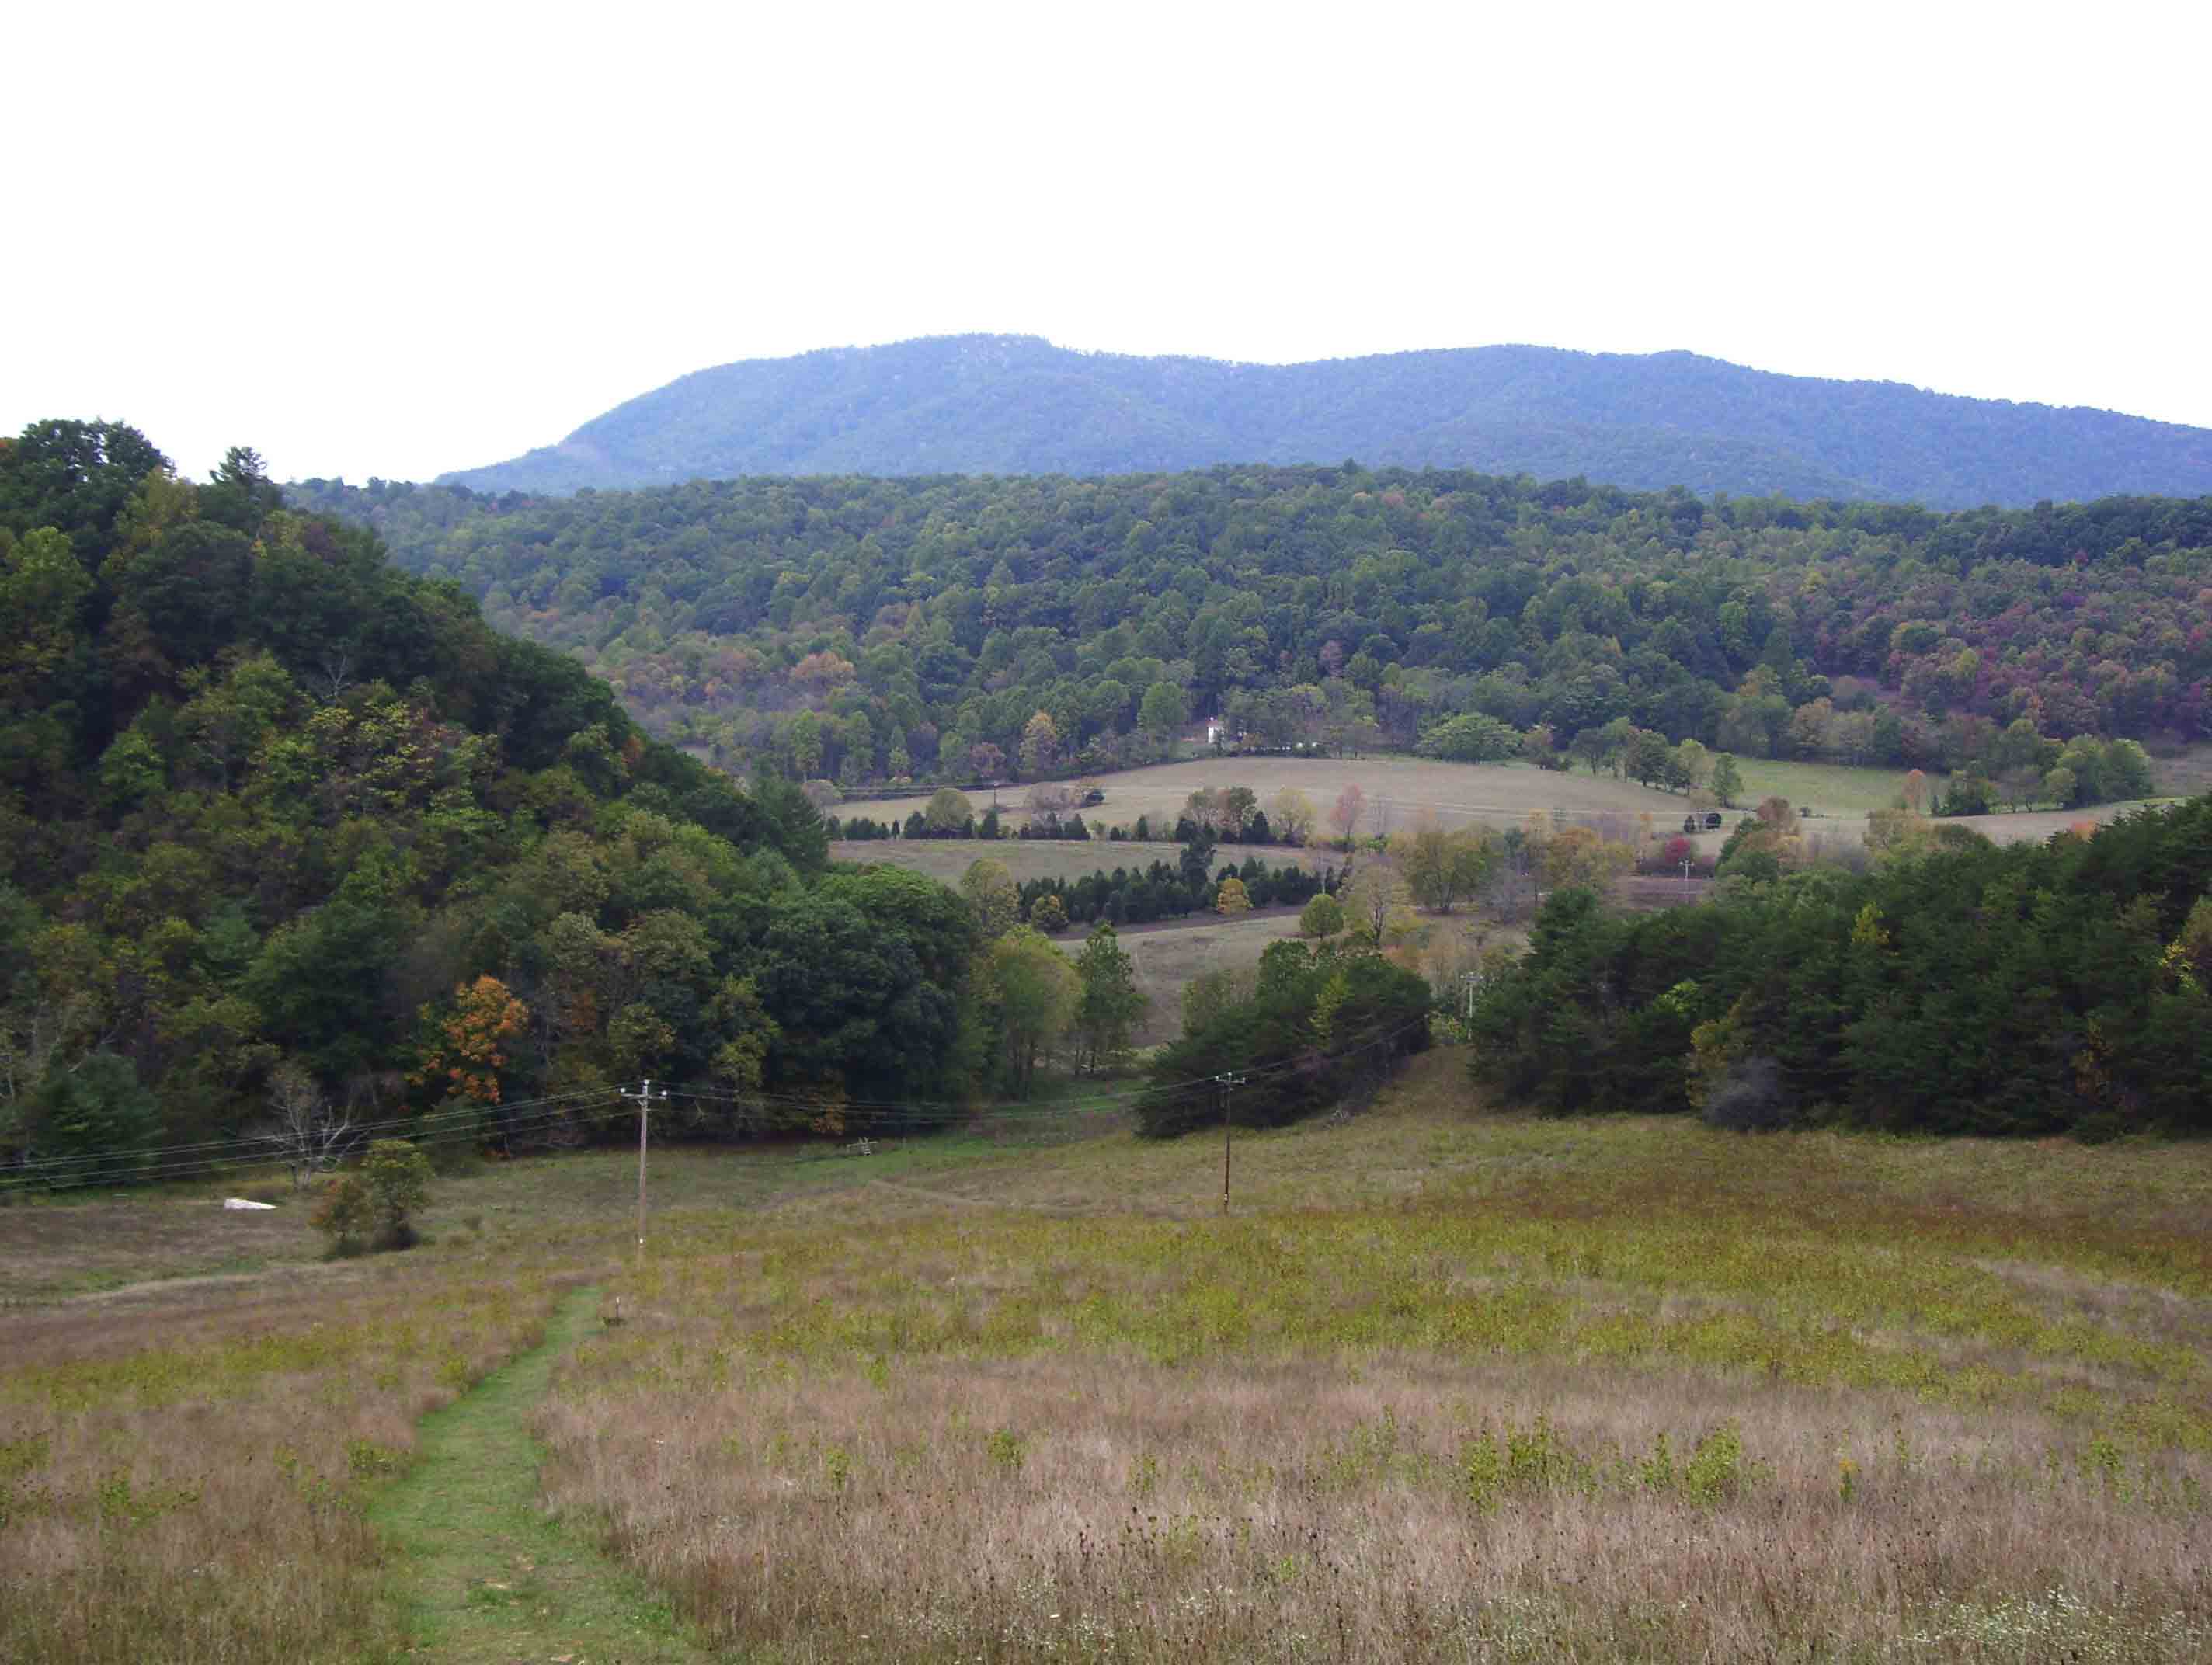 View to west from approximately Mile 23.5 as the southbound trail descends across field to VA 785. The prominent mountain on the other side of the Valley is Cove Mountain which the trail climbs. Dragon's Tooth is on that ridge.  Courtesy dlcul@conncoll.edu